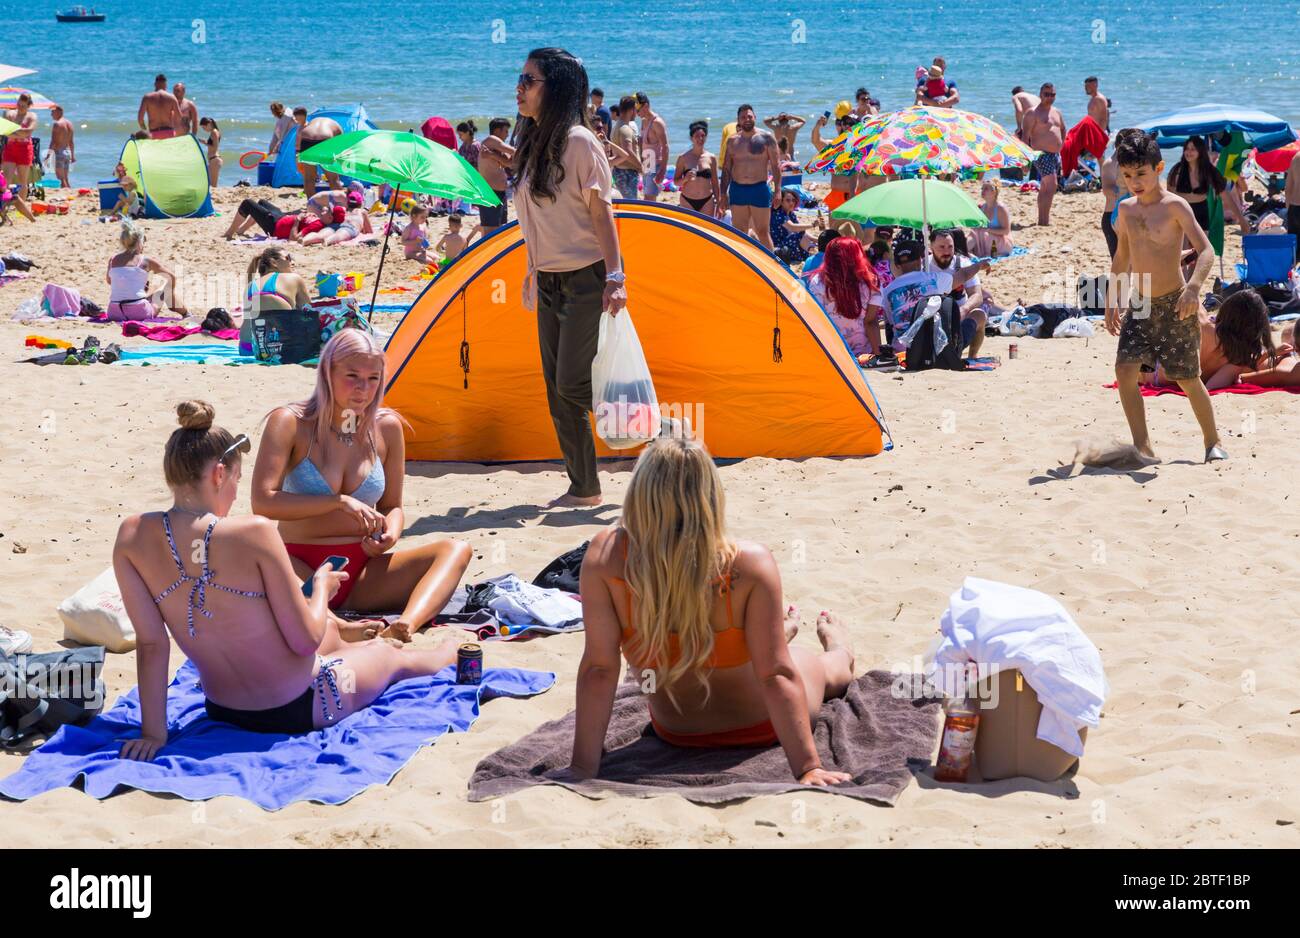 Bournemouth, Dorset UK. 25th May 2020. UK weather: scorching hot at Bournemouth beaches with clear blue skies and unbroken sunshine, as temperatures soar on Bank Holiday Monday. Sunseekers flock to the seaside and beaches are packed, with car parks full and cars left anywhere and everywhere. Credit: Carolyn Jenkins/Alamy Live News Stock Photo